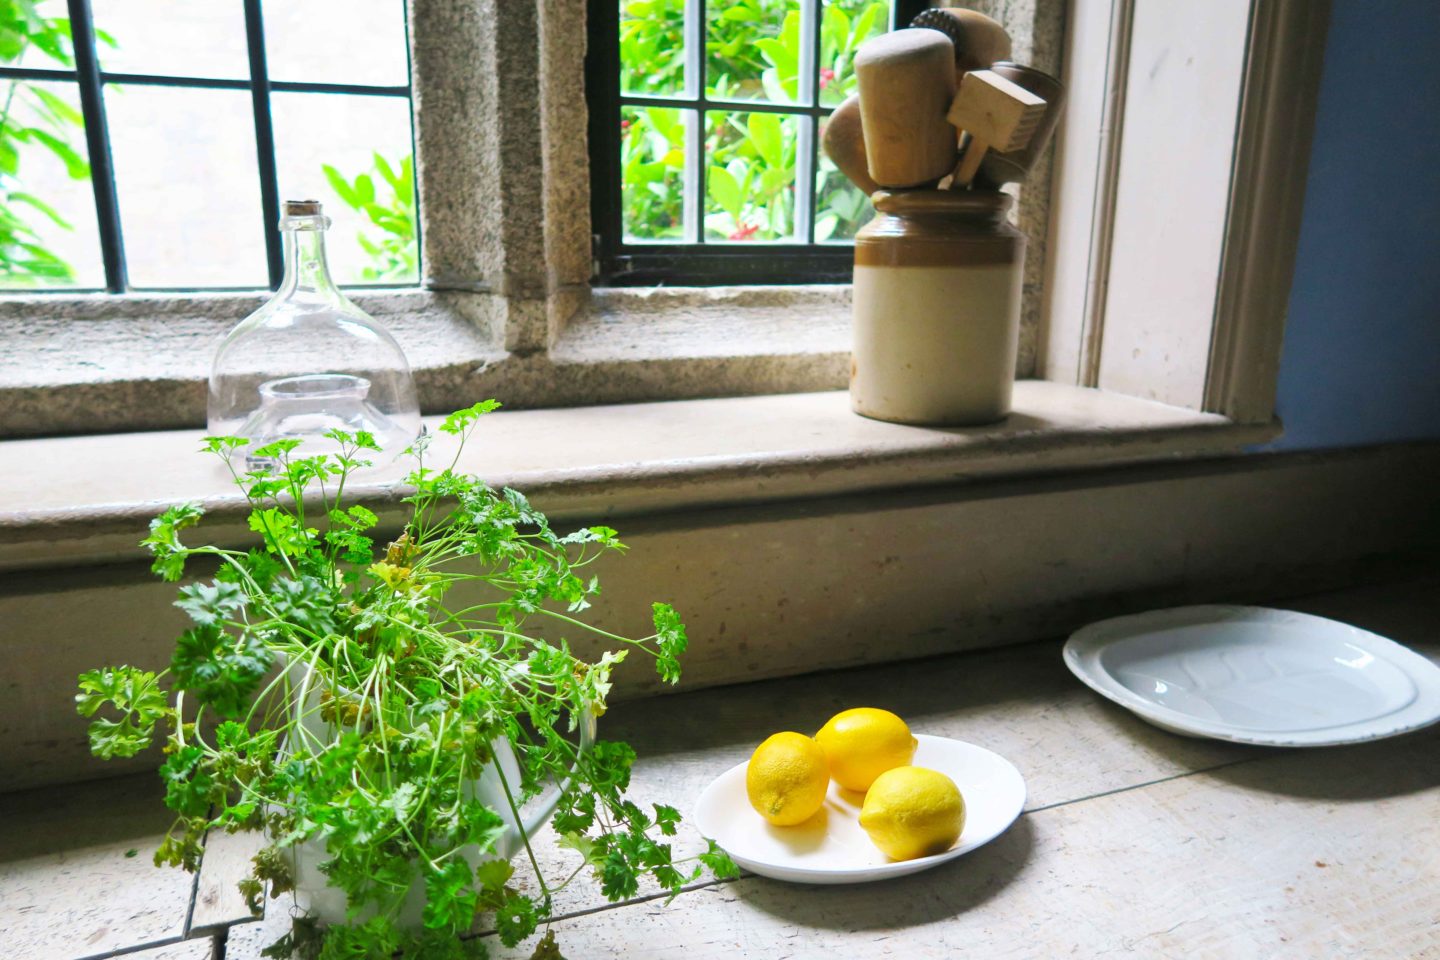 lemons in kitchen at lanhydrock house owned by the national trust